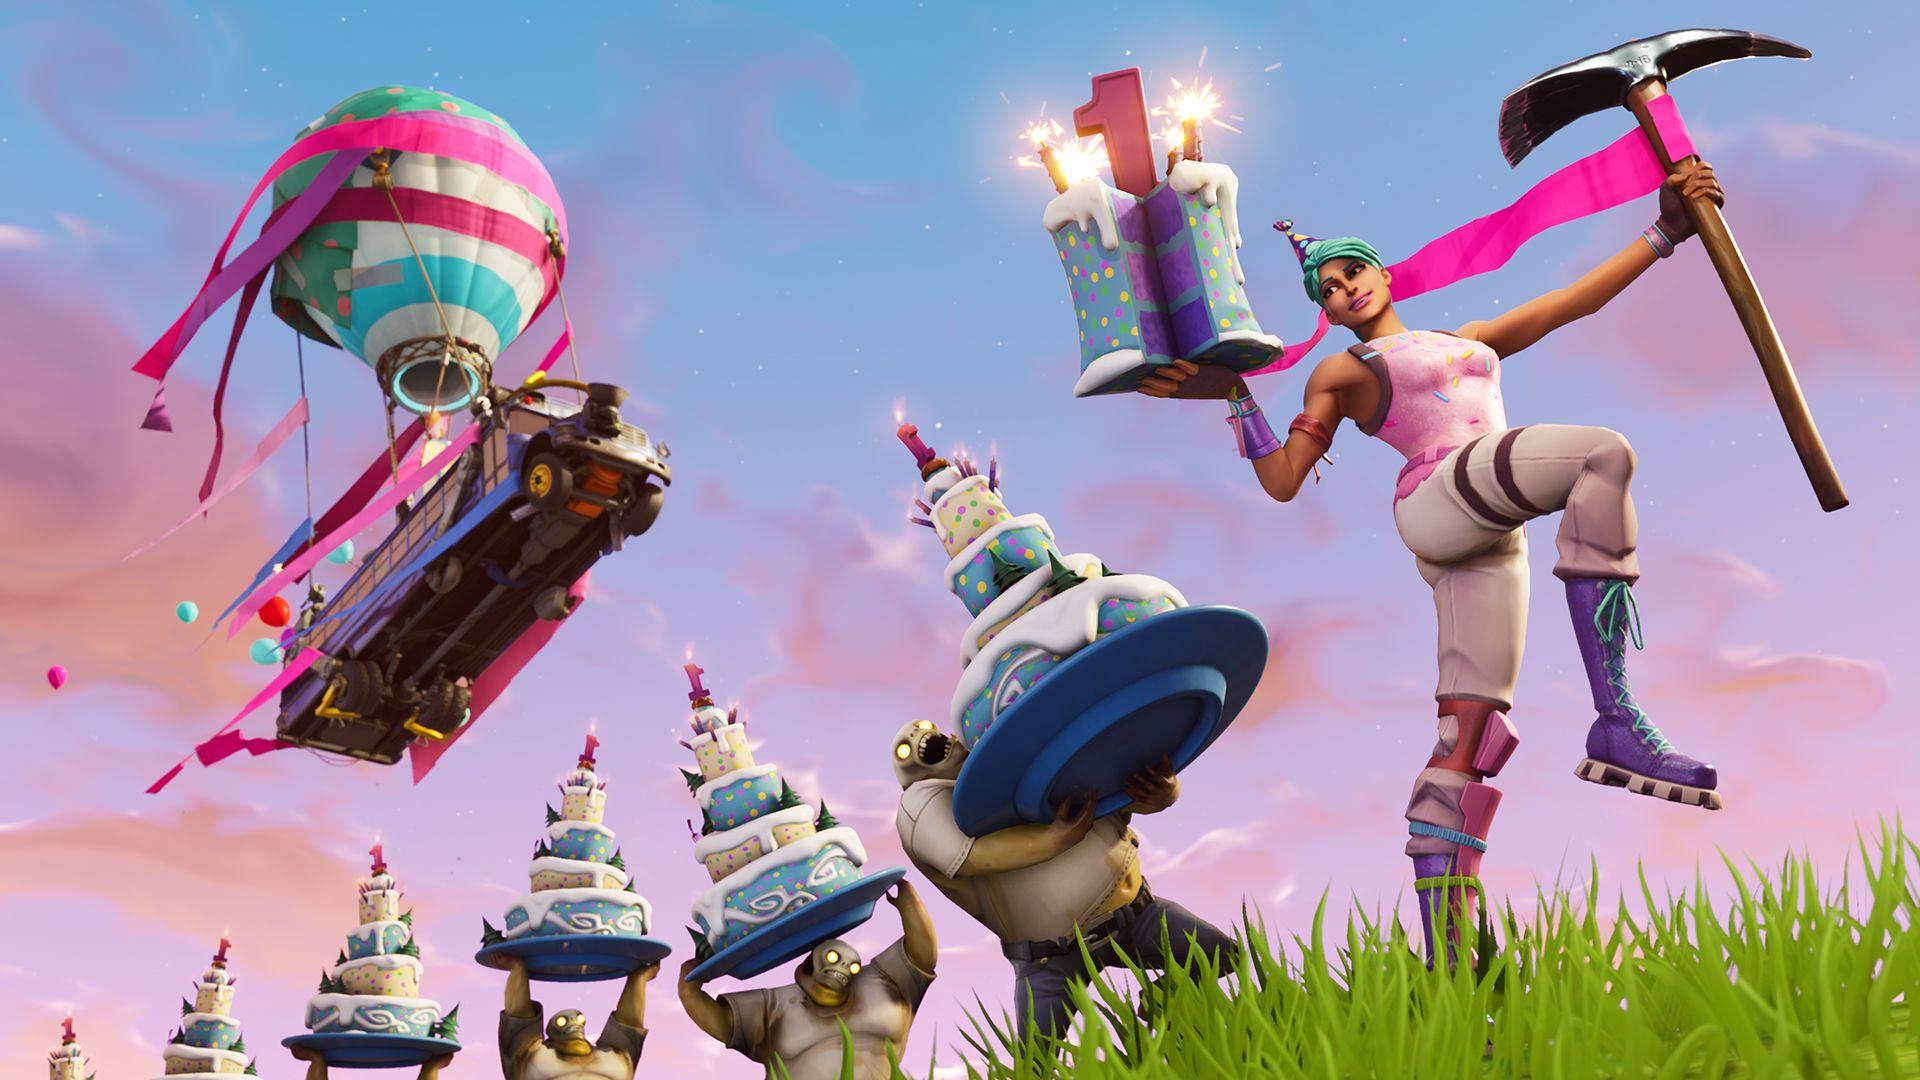 Fortnite is Turning One!